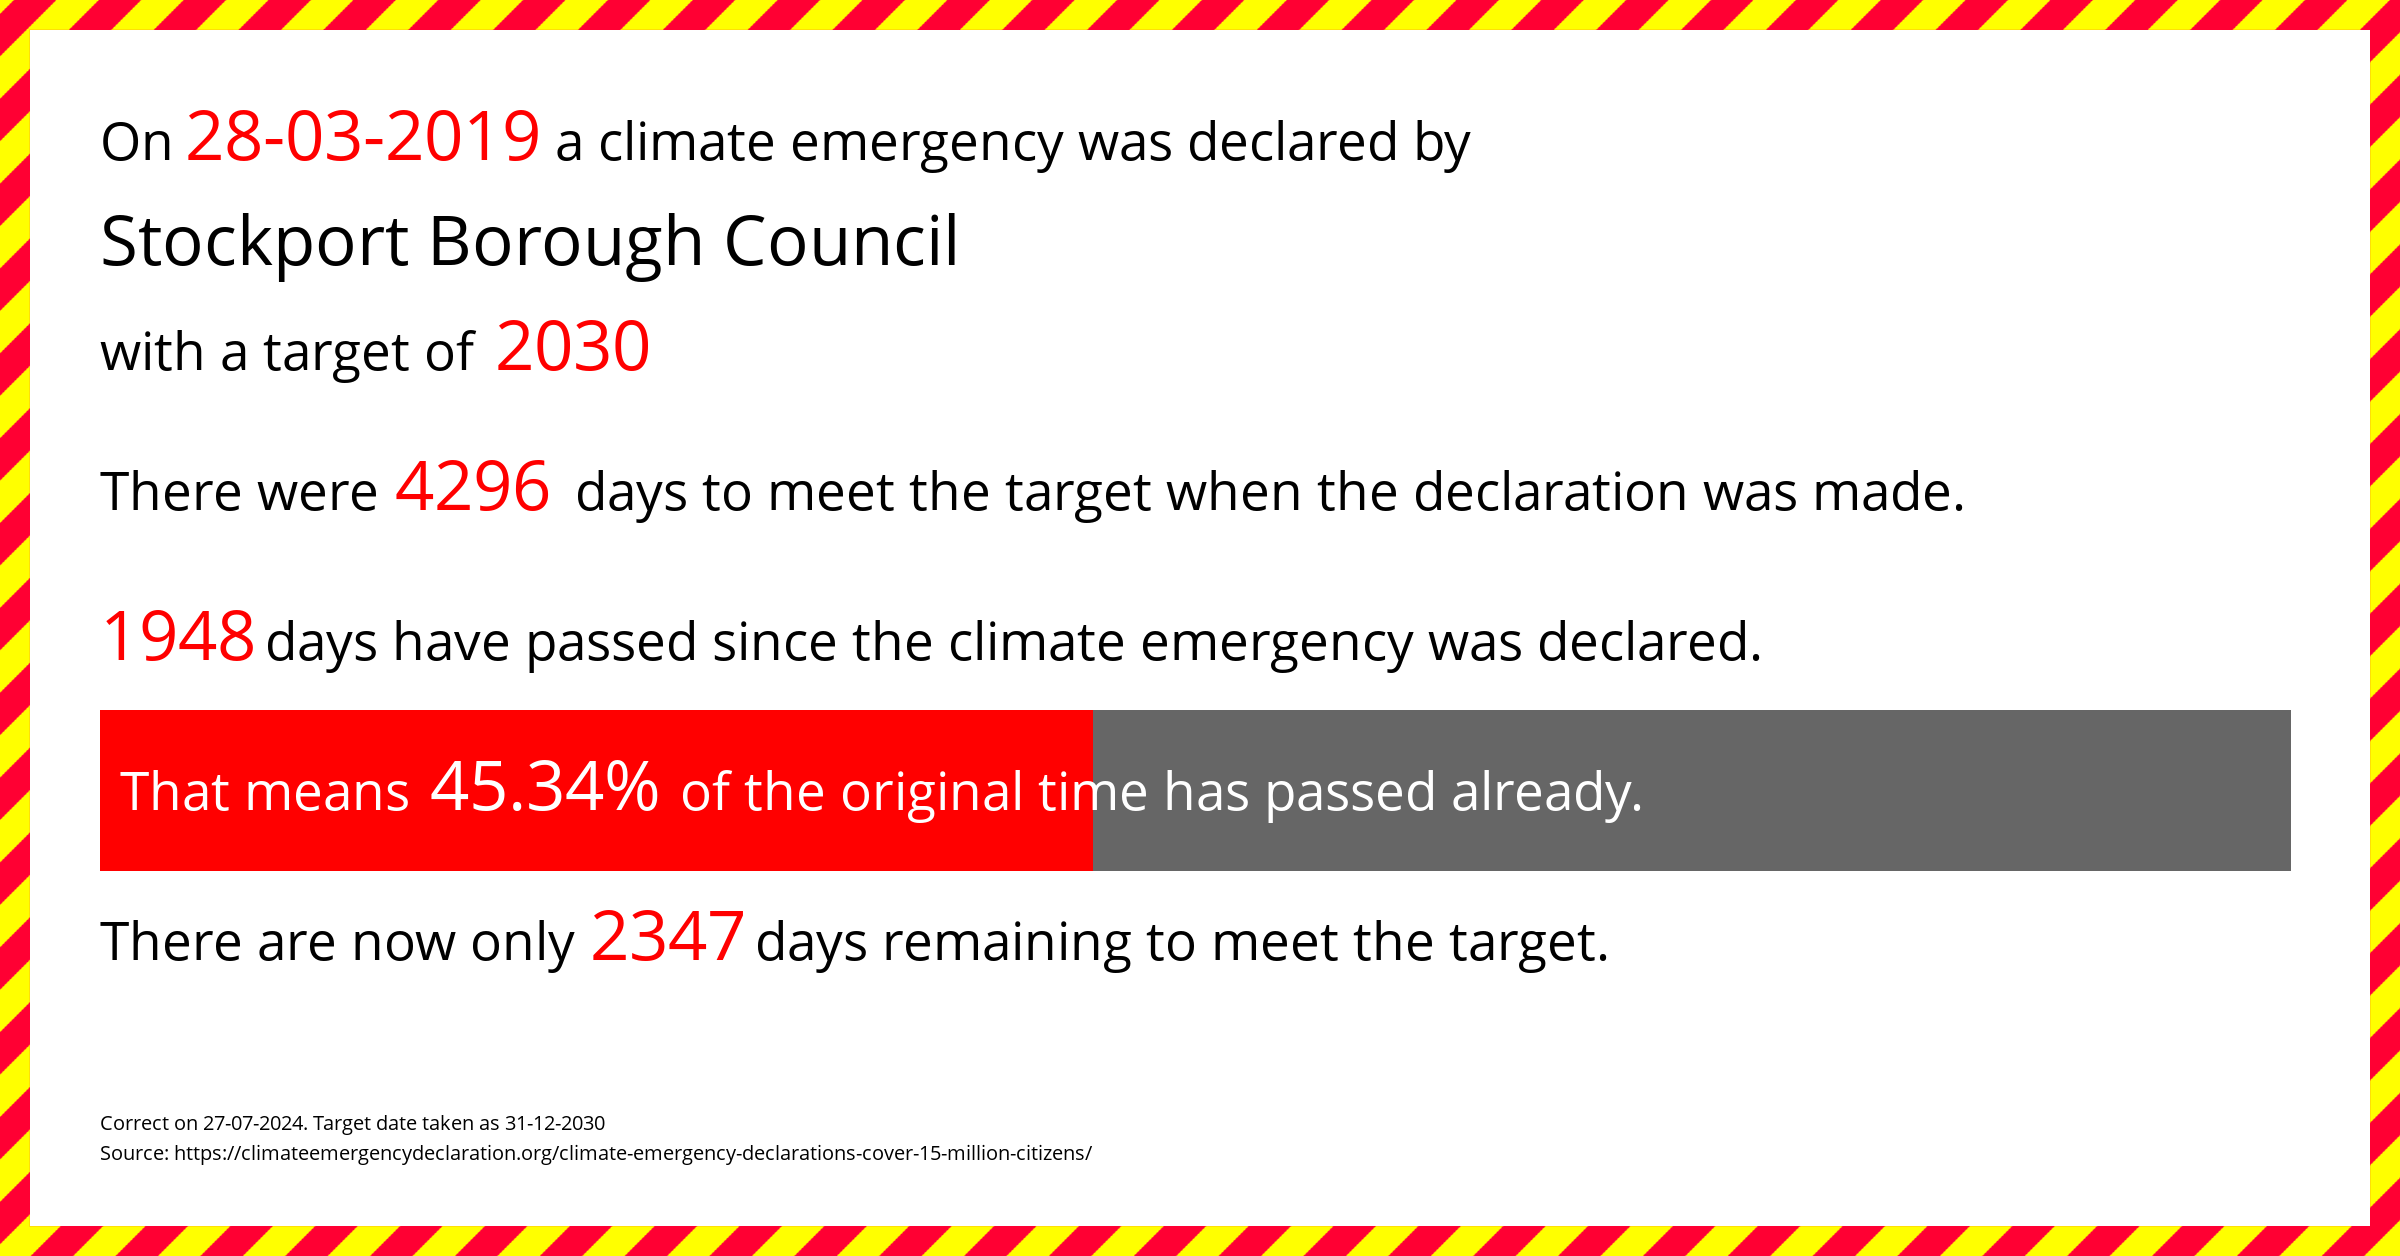 Stockport Borough Council declared a Climate emergency on Thursday 28th March 2019, with a target of 2030.